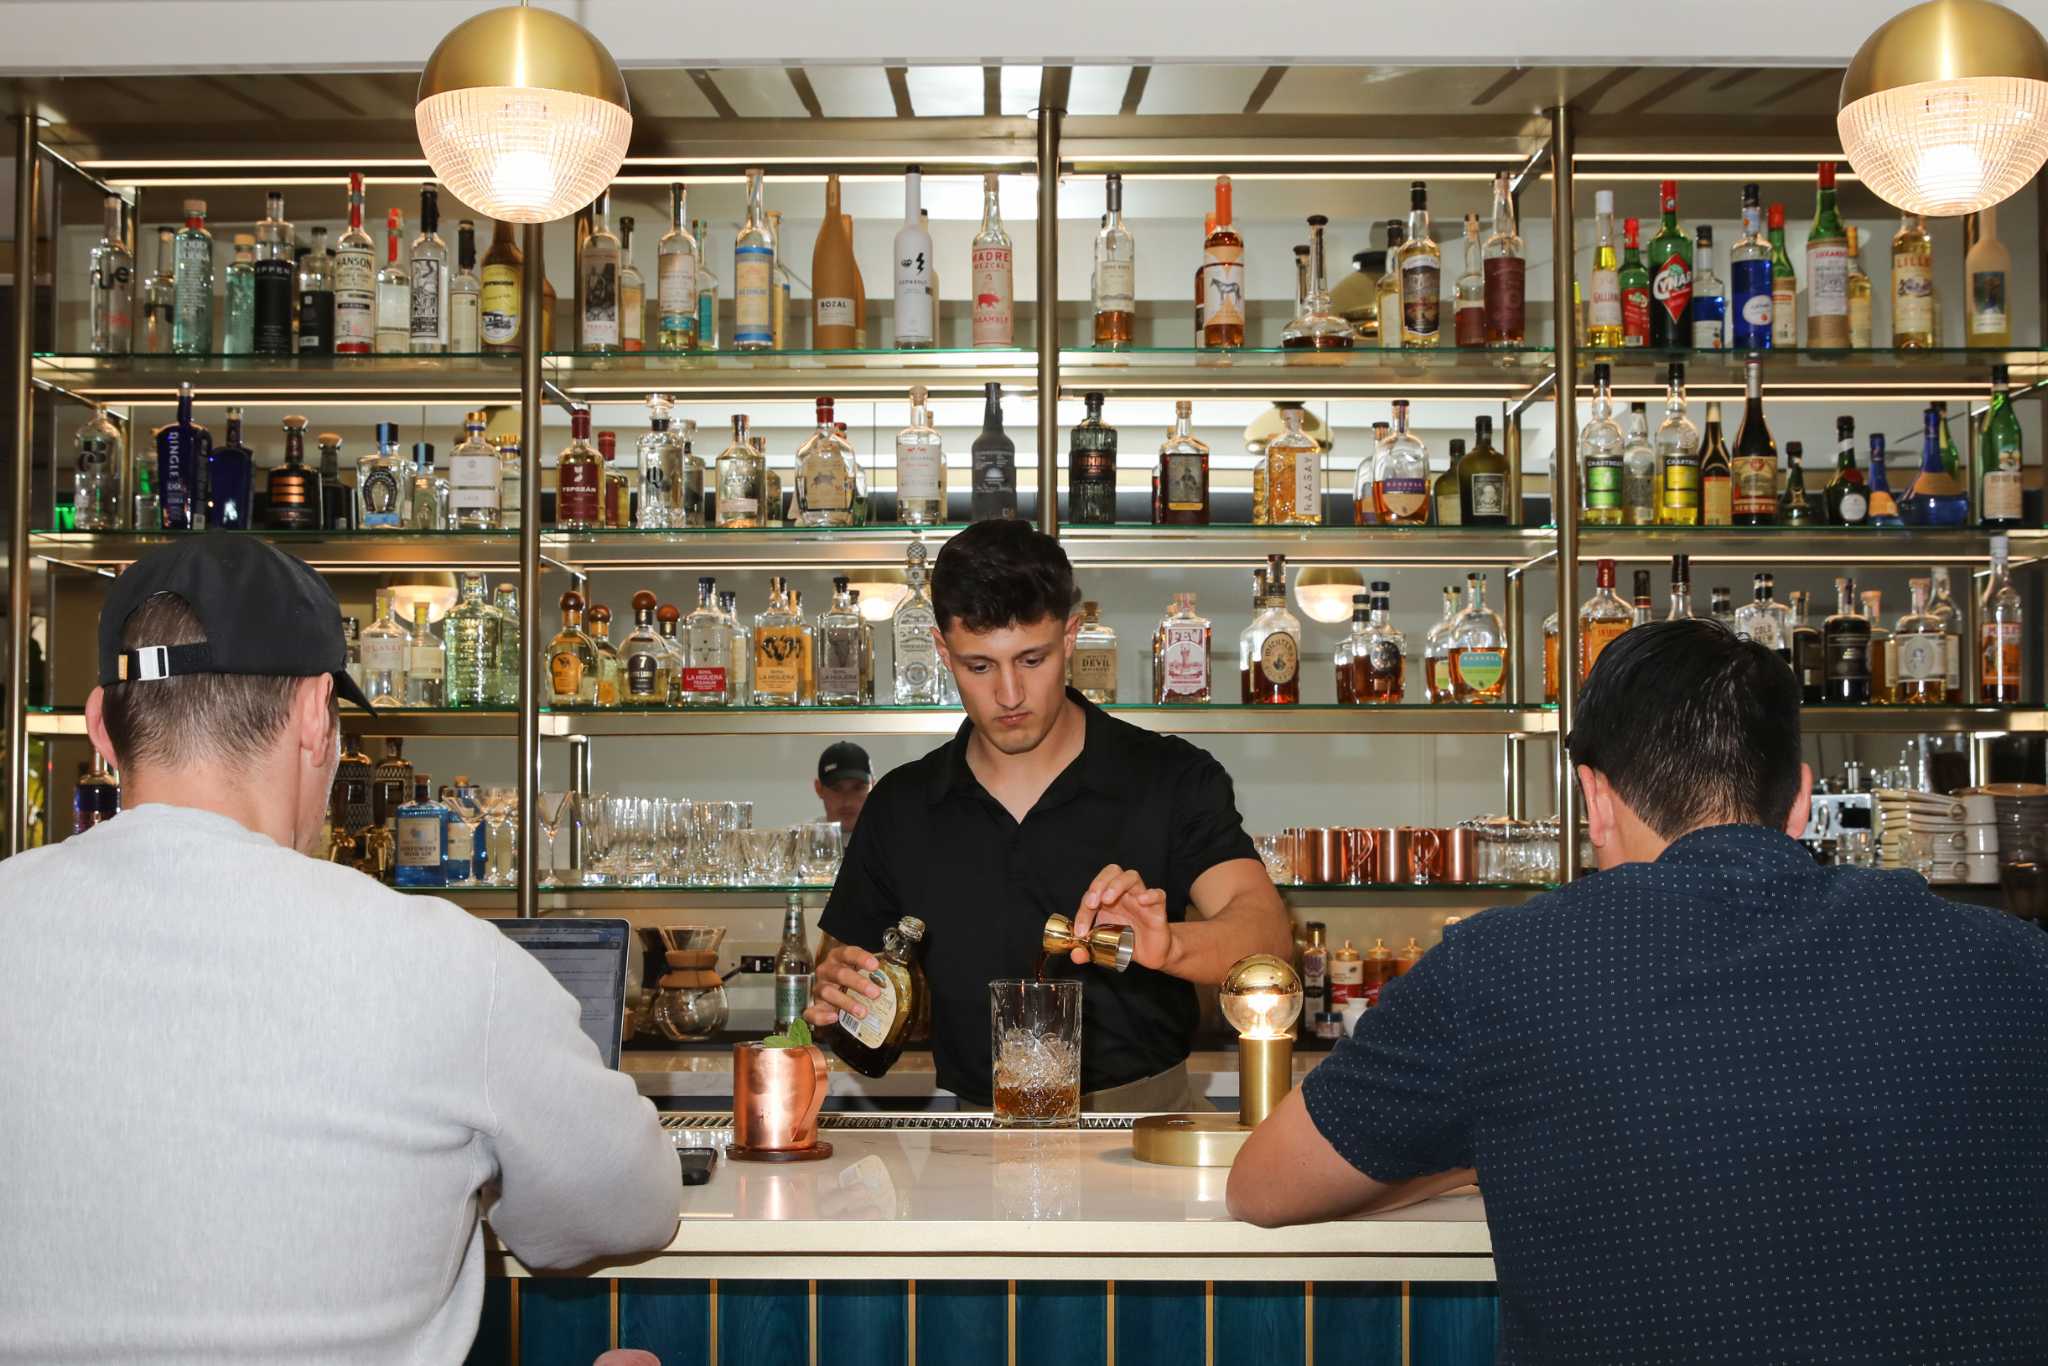 Why one tech company turned its . office into a bar